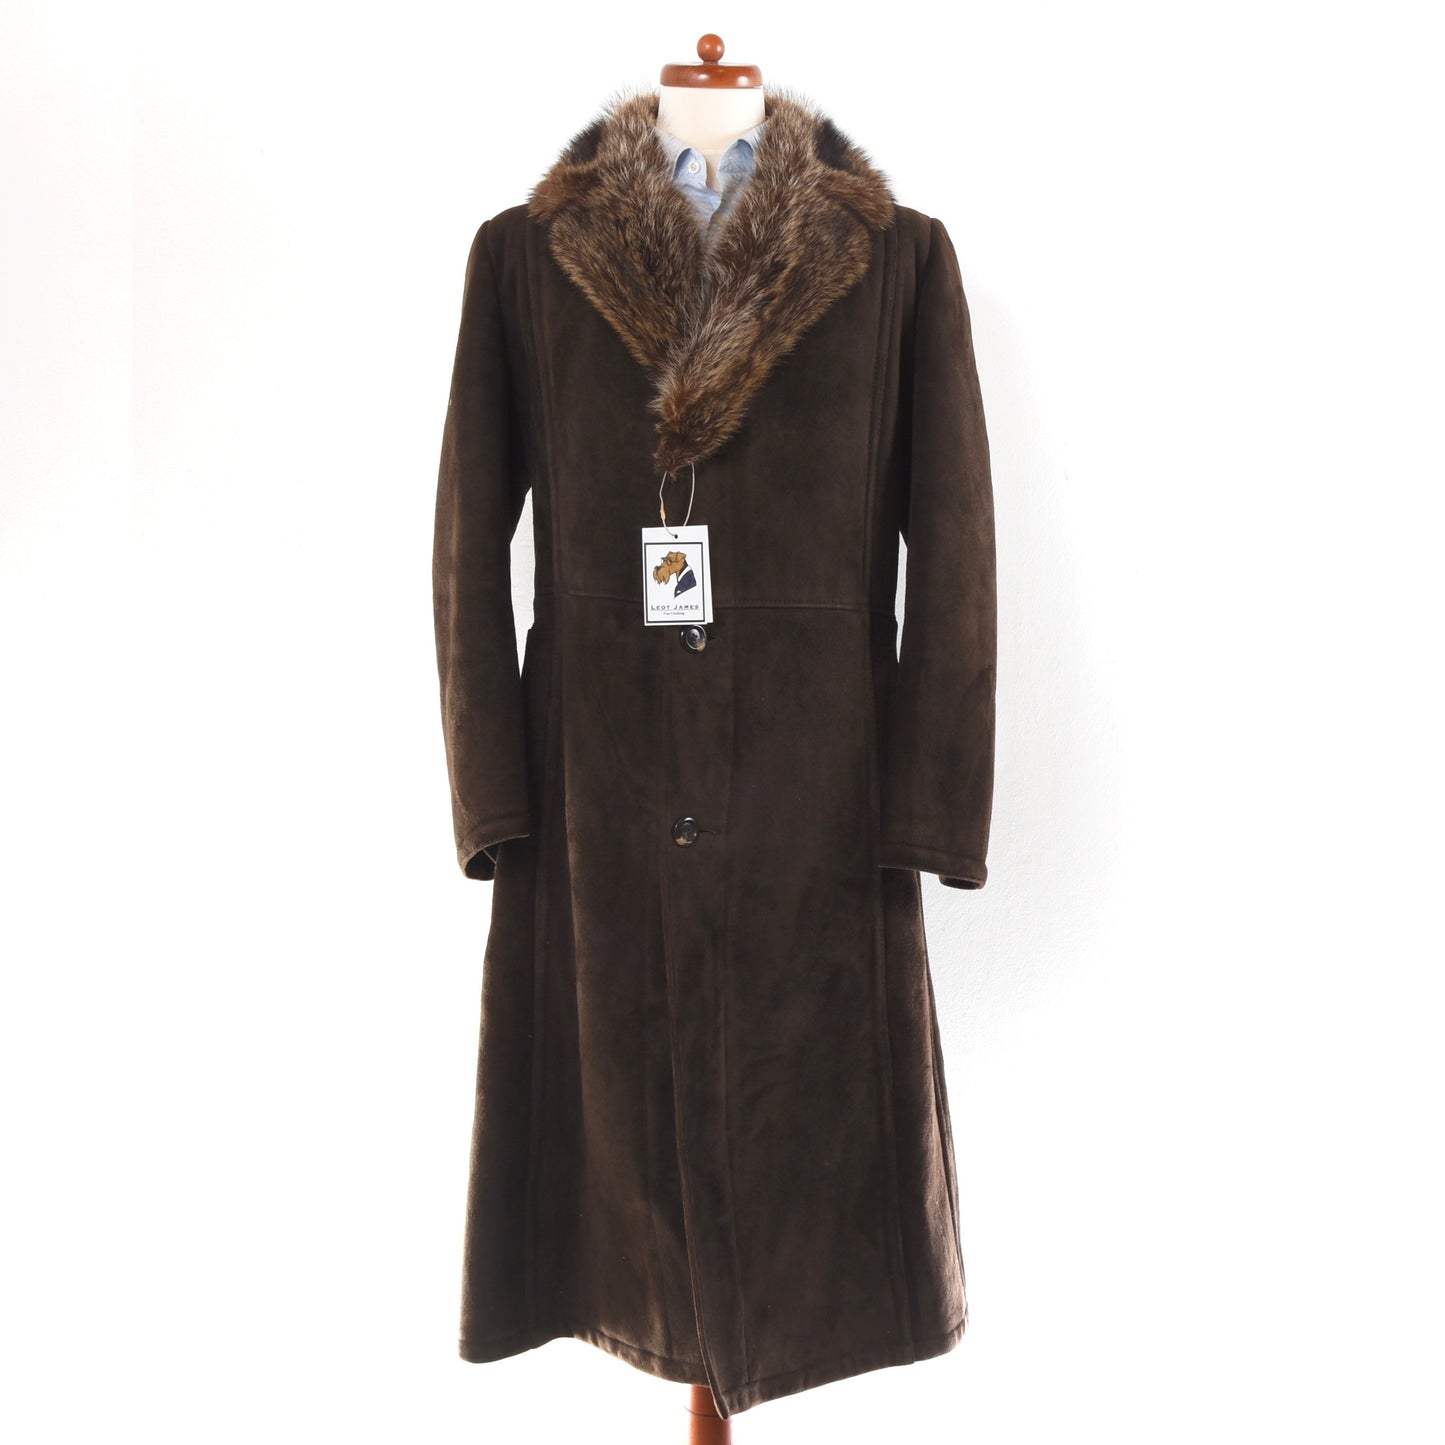 Shearling Coat Feat. Fur Collar Size 50 - Chocolate Brown